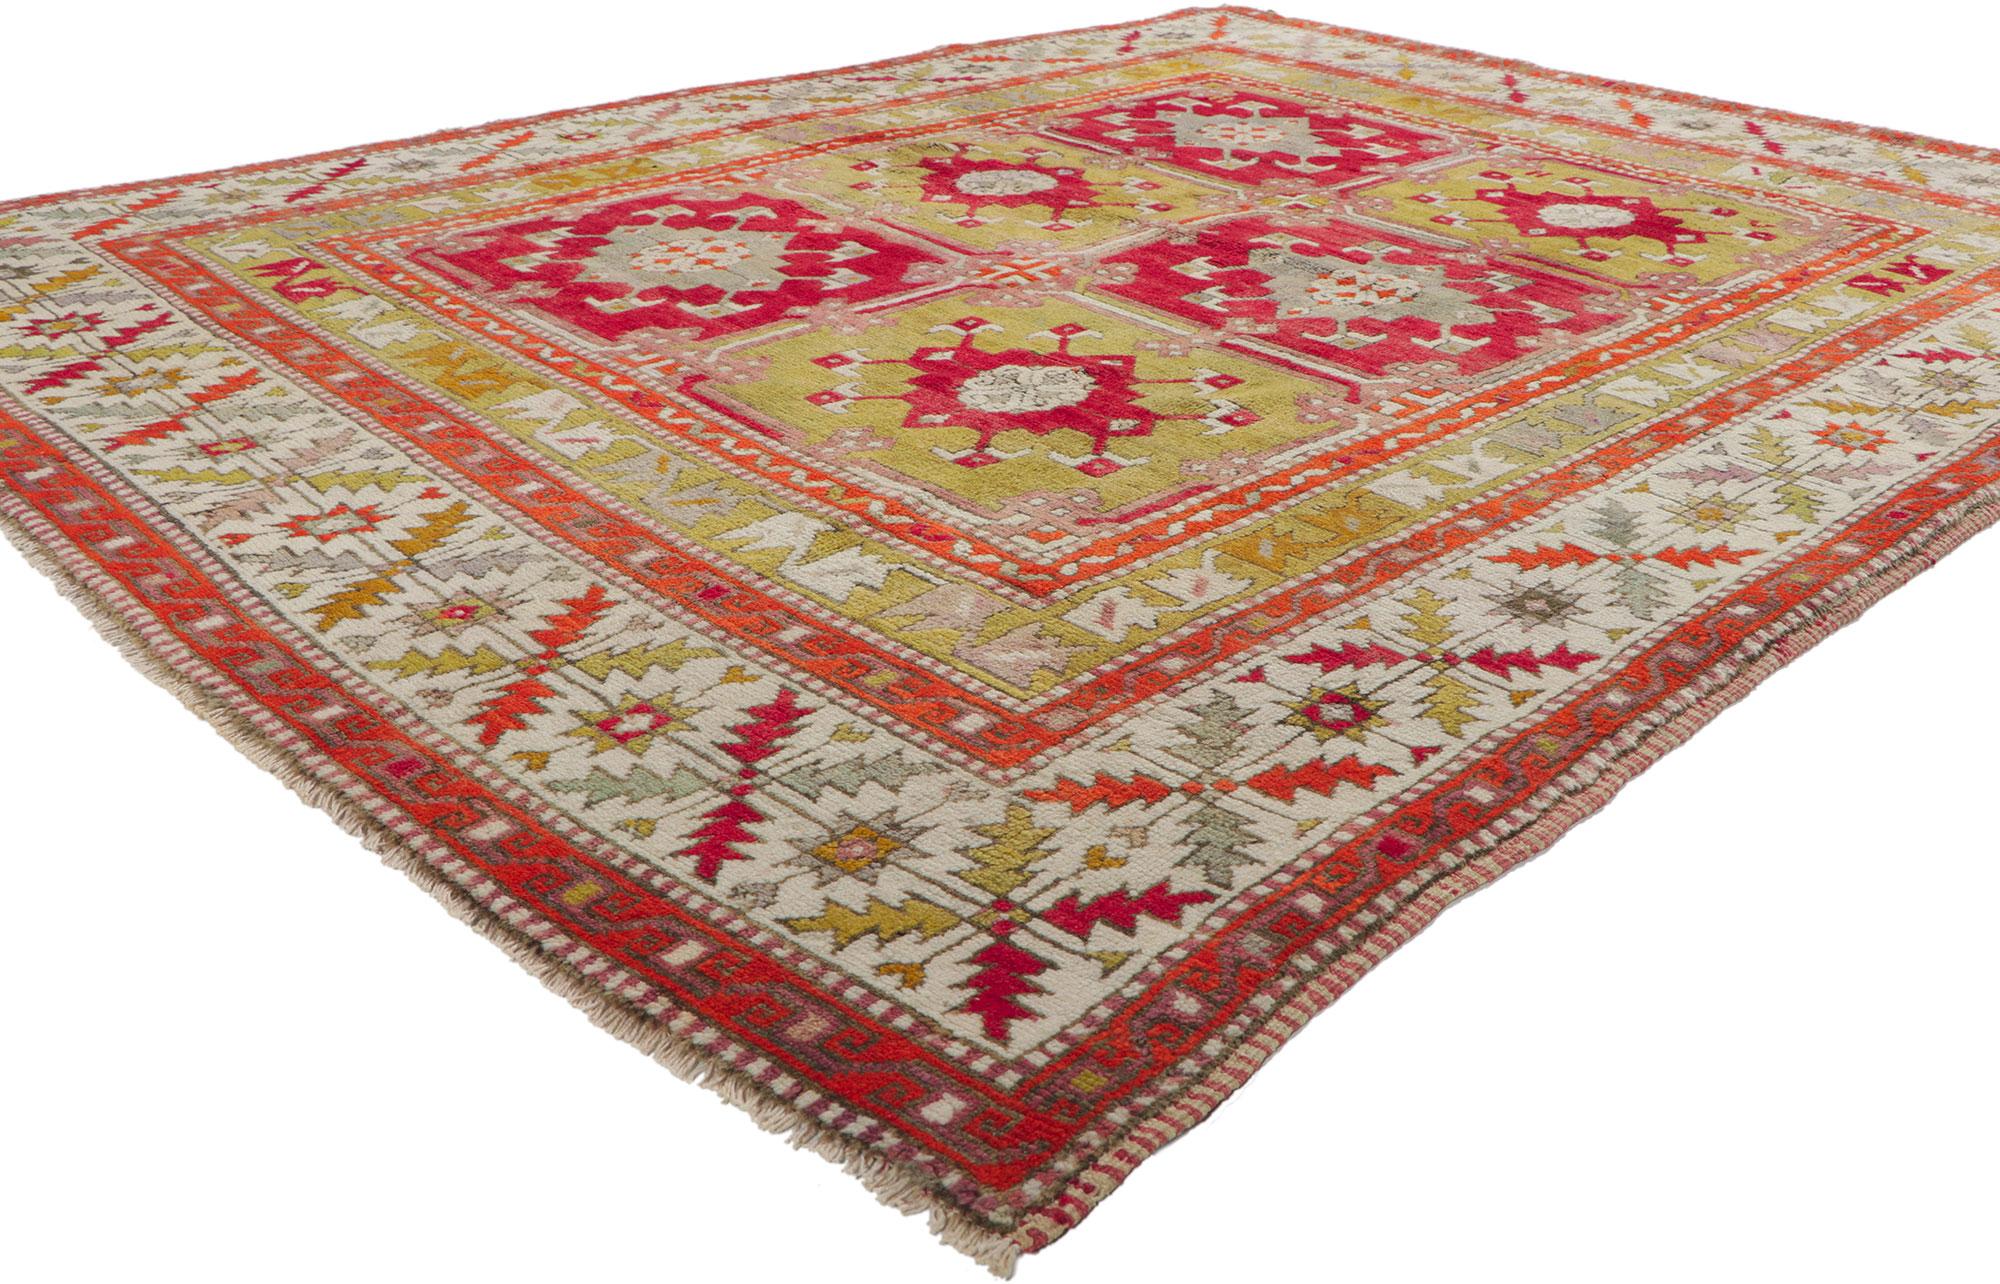 51781 Vintage Turkish Oushak rug, 06'01 x 07'10.
Showcasing a bold geometric design, incredible detail and texture, this hand knitted wool vintage Turkish Oushak rug is a captivating vision of woven beauty. The eye-catching compartmental design and